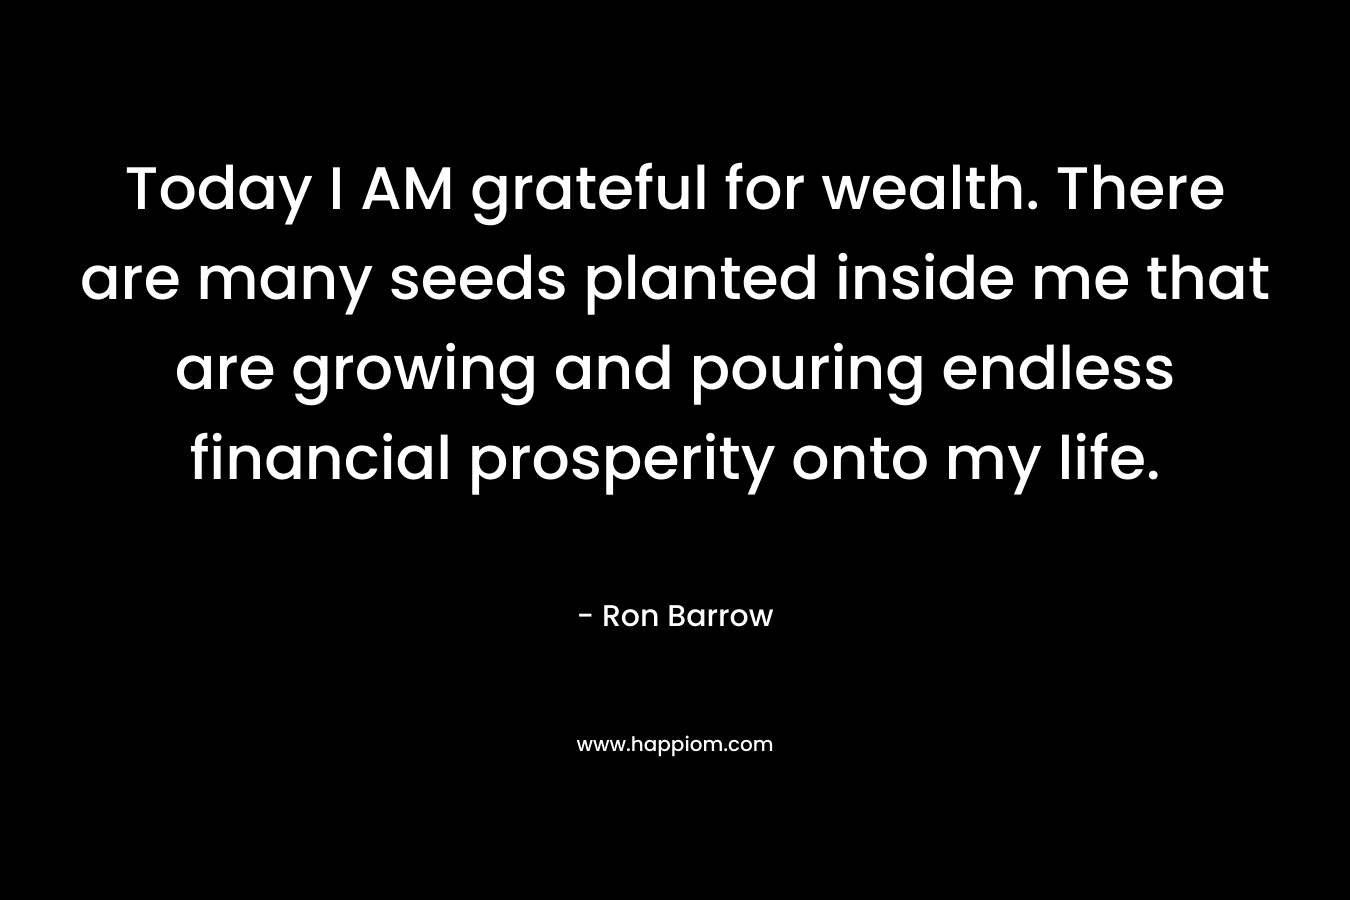 Today I AM grateful for wealth. There are many seeds planted inside me that are growing and pouring endless financial prosperity onto my life. – Ron Barrow